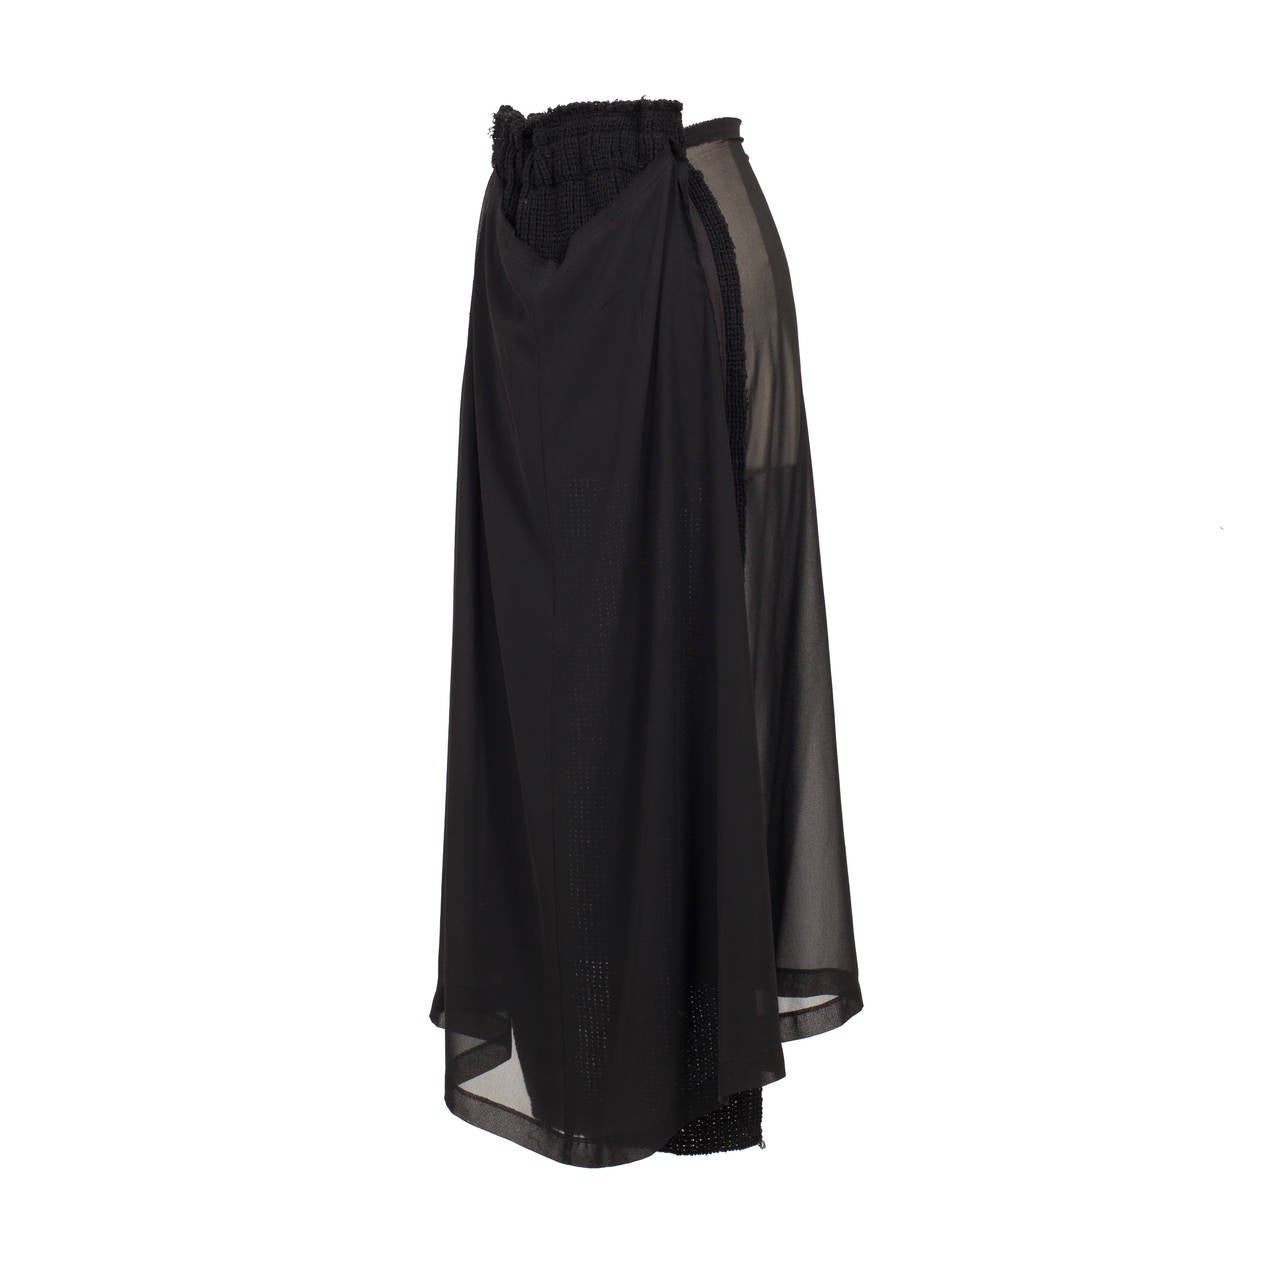 Comme des Garcon black sheer skirt with double knit front detail from AD2002.
Measurements : 
Size - M
Waist - 62 cm
Width - 84 cm
Total length aprox. - 83 cm